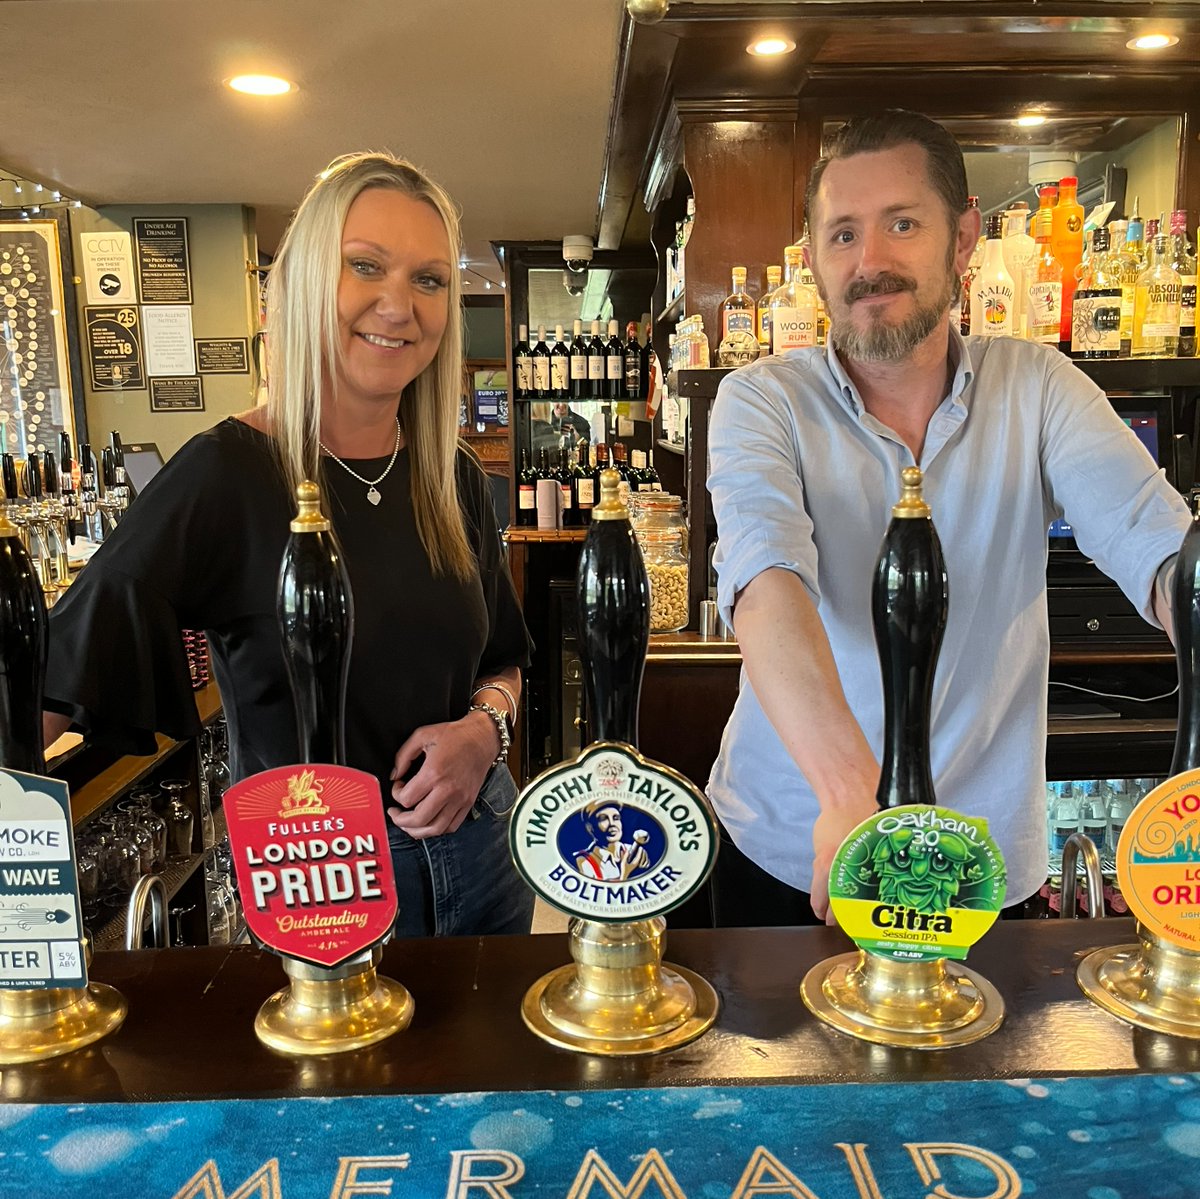 Lucy, Steven and the team at The Royal George are delighted to announce that Boltmaker is now pouring at their pub. 🍺 Set in leafy Hersham, The Royal George is a traditional pub offering cracking beer, freshly prepared food, a friendly service and a great beer garden. ☀️